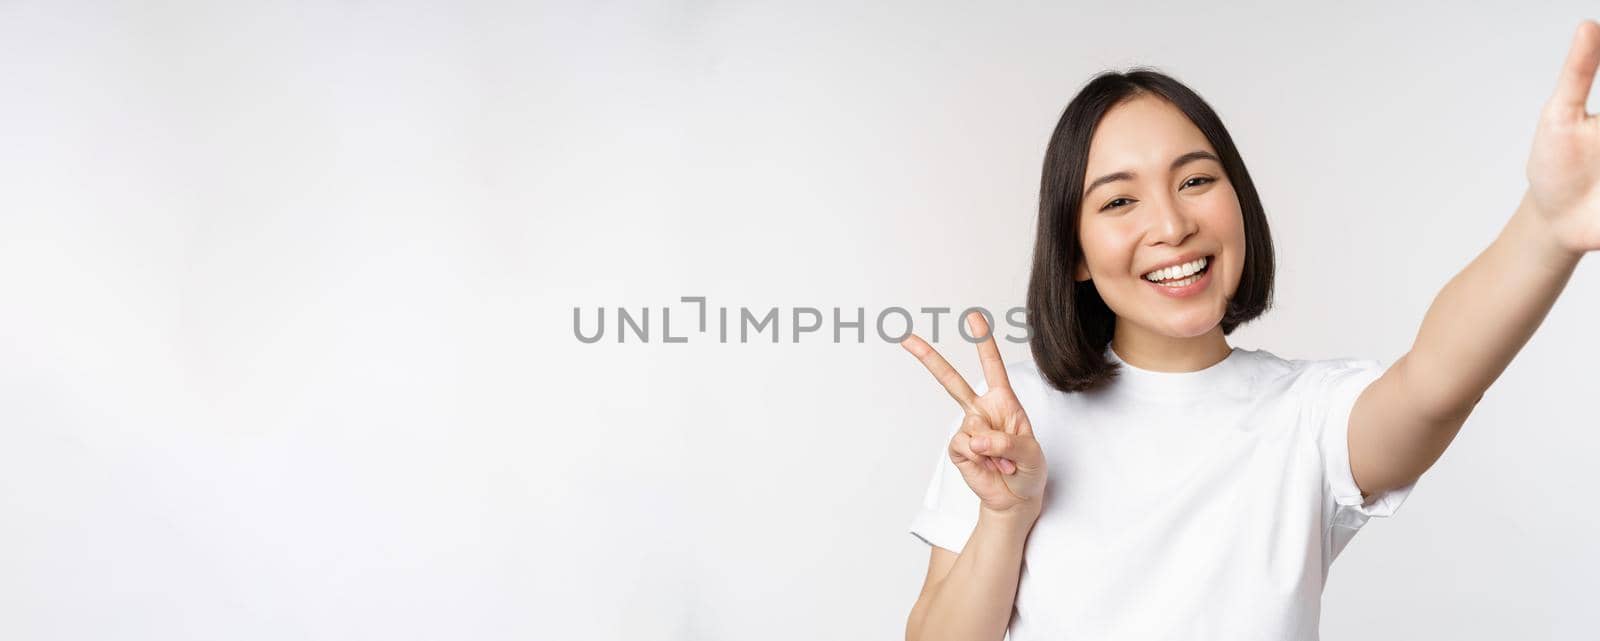 Beautiful young asian woman taking selfie, posing with peace v-sign, smiling happy, take photo, posing against white background.